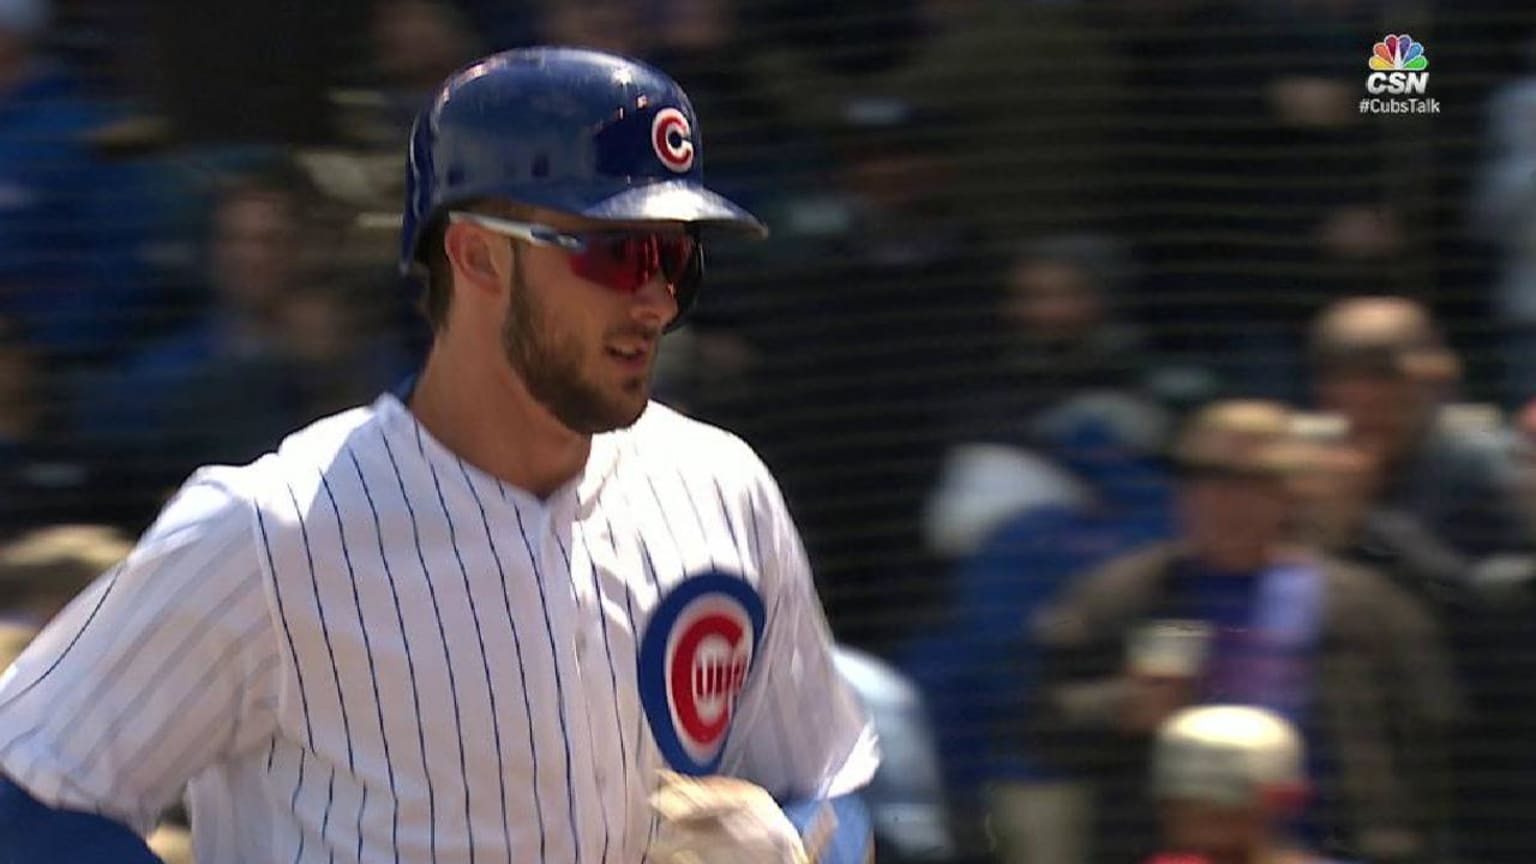 Cubs' Kris Bryant and wife announce pregnancy in emotional video